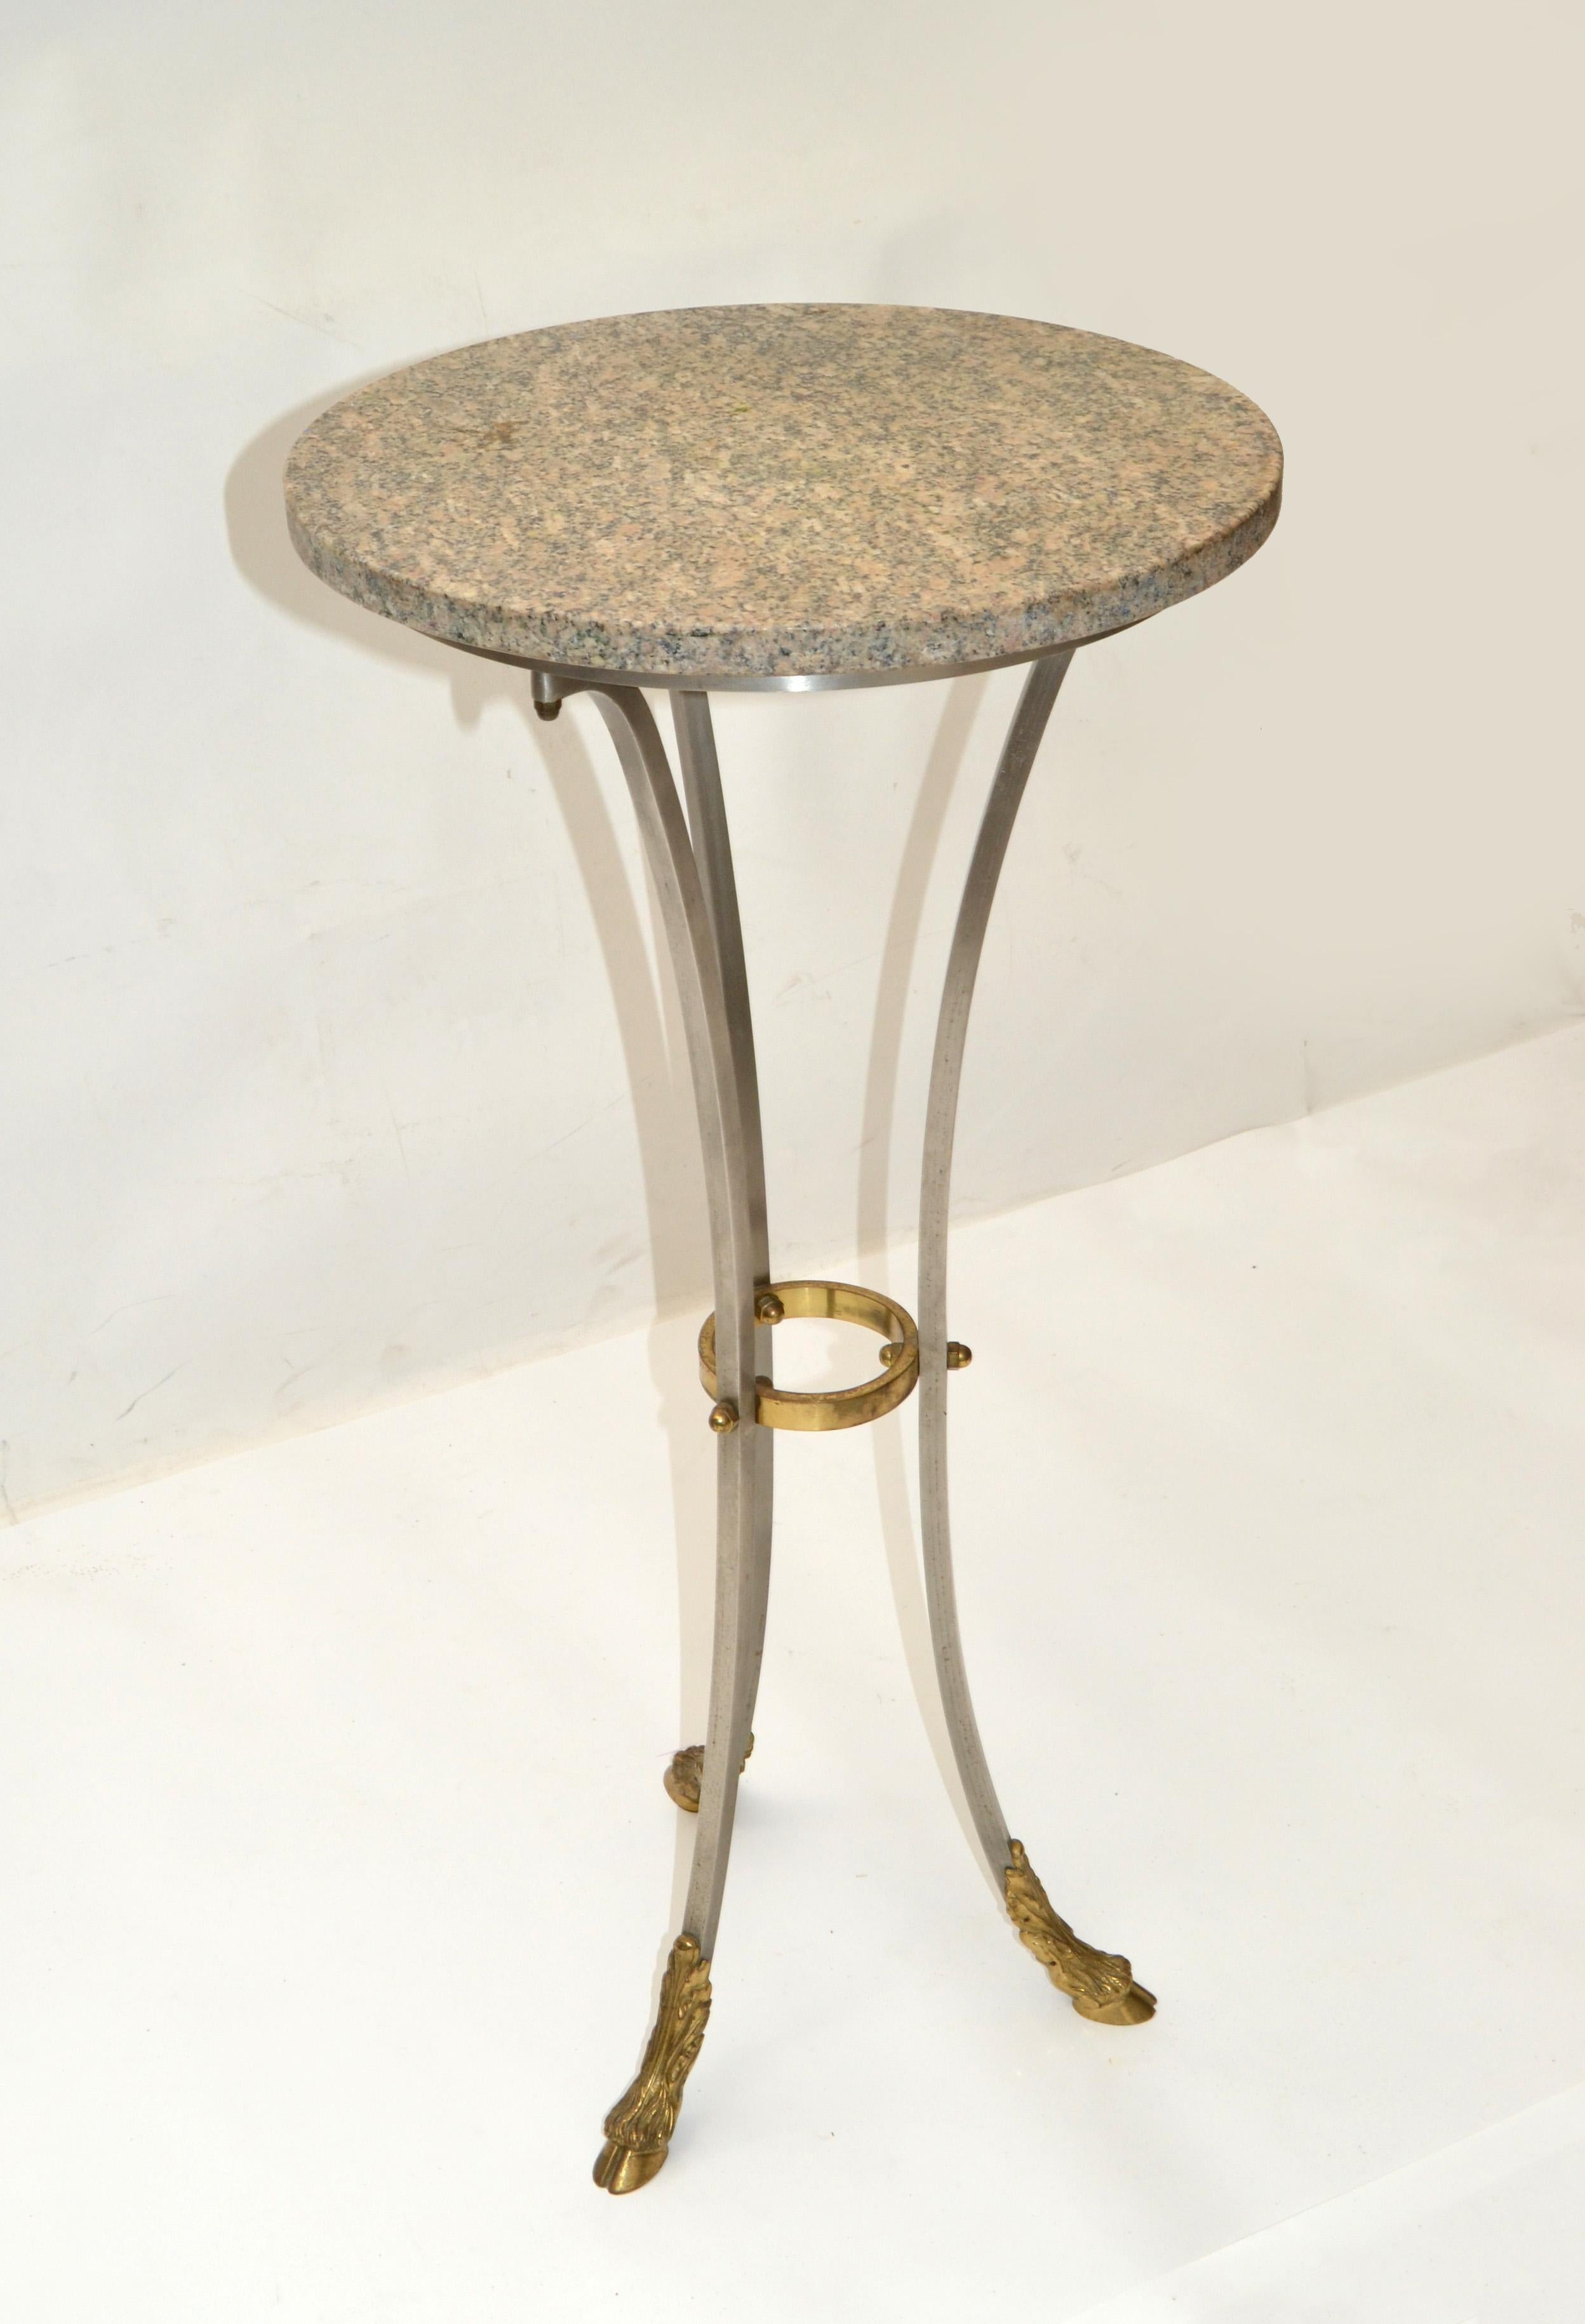 20th Century Maison Jansen French Neoclassical Steel & Bronze Hoof Feet Pedestal Drink Table For Sale